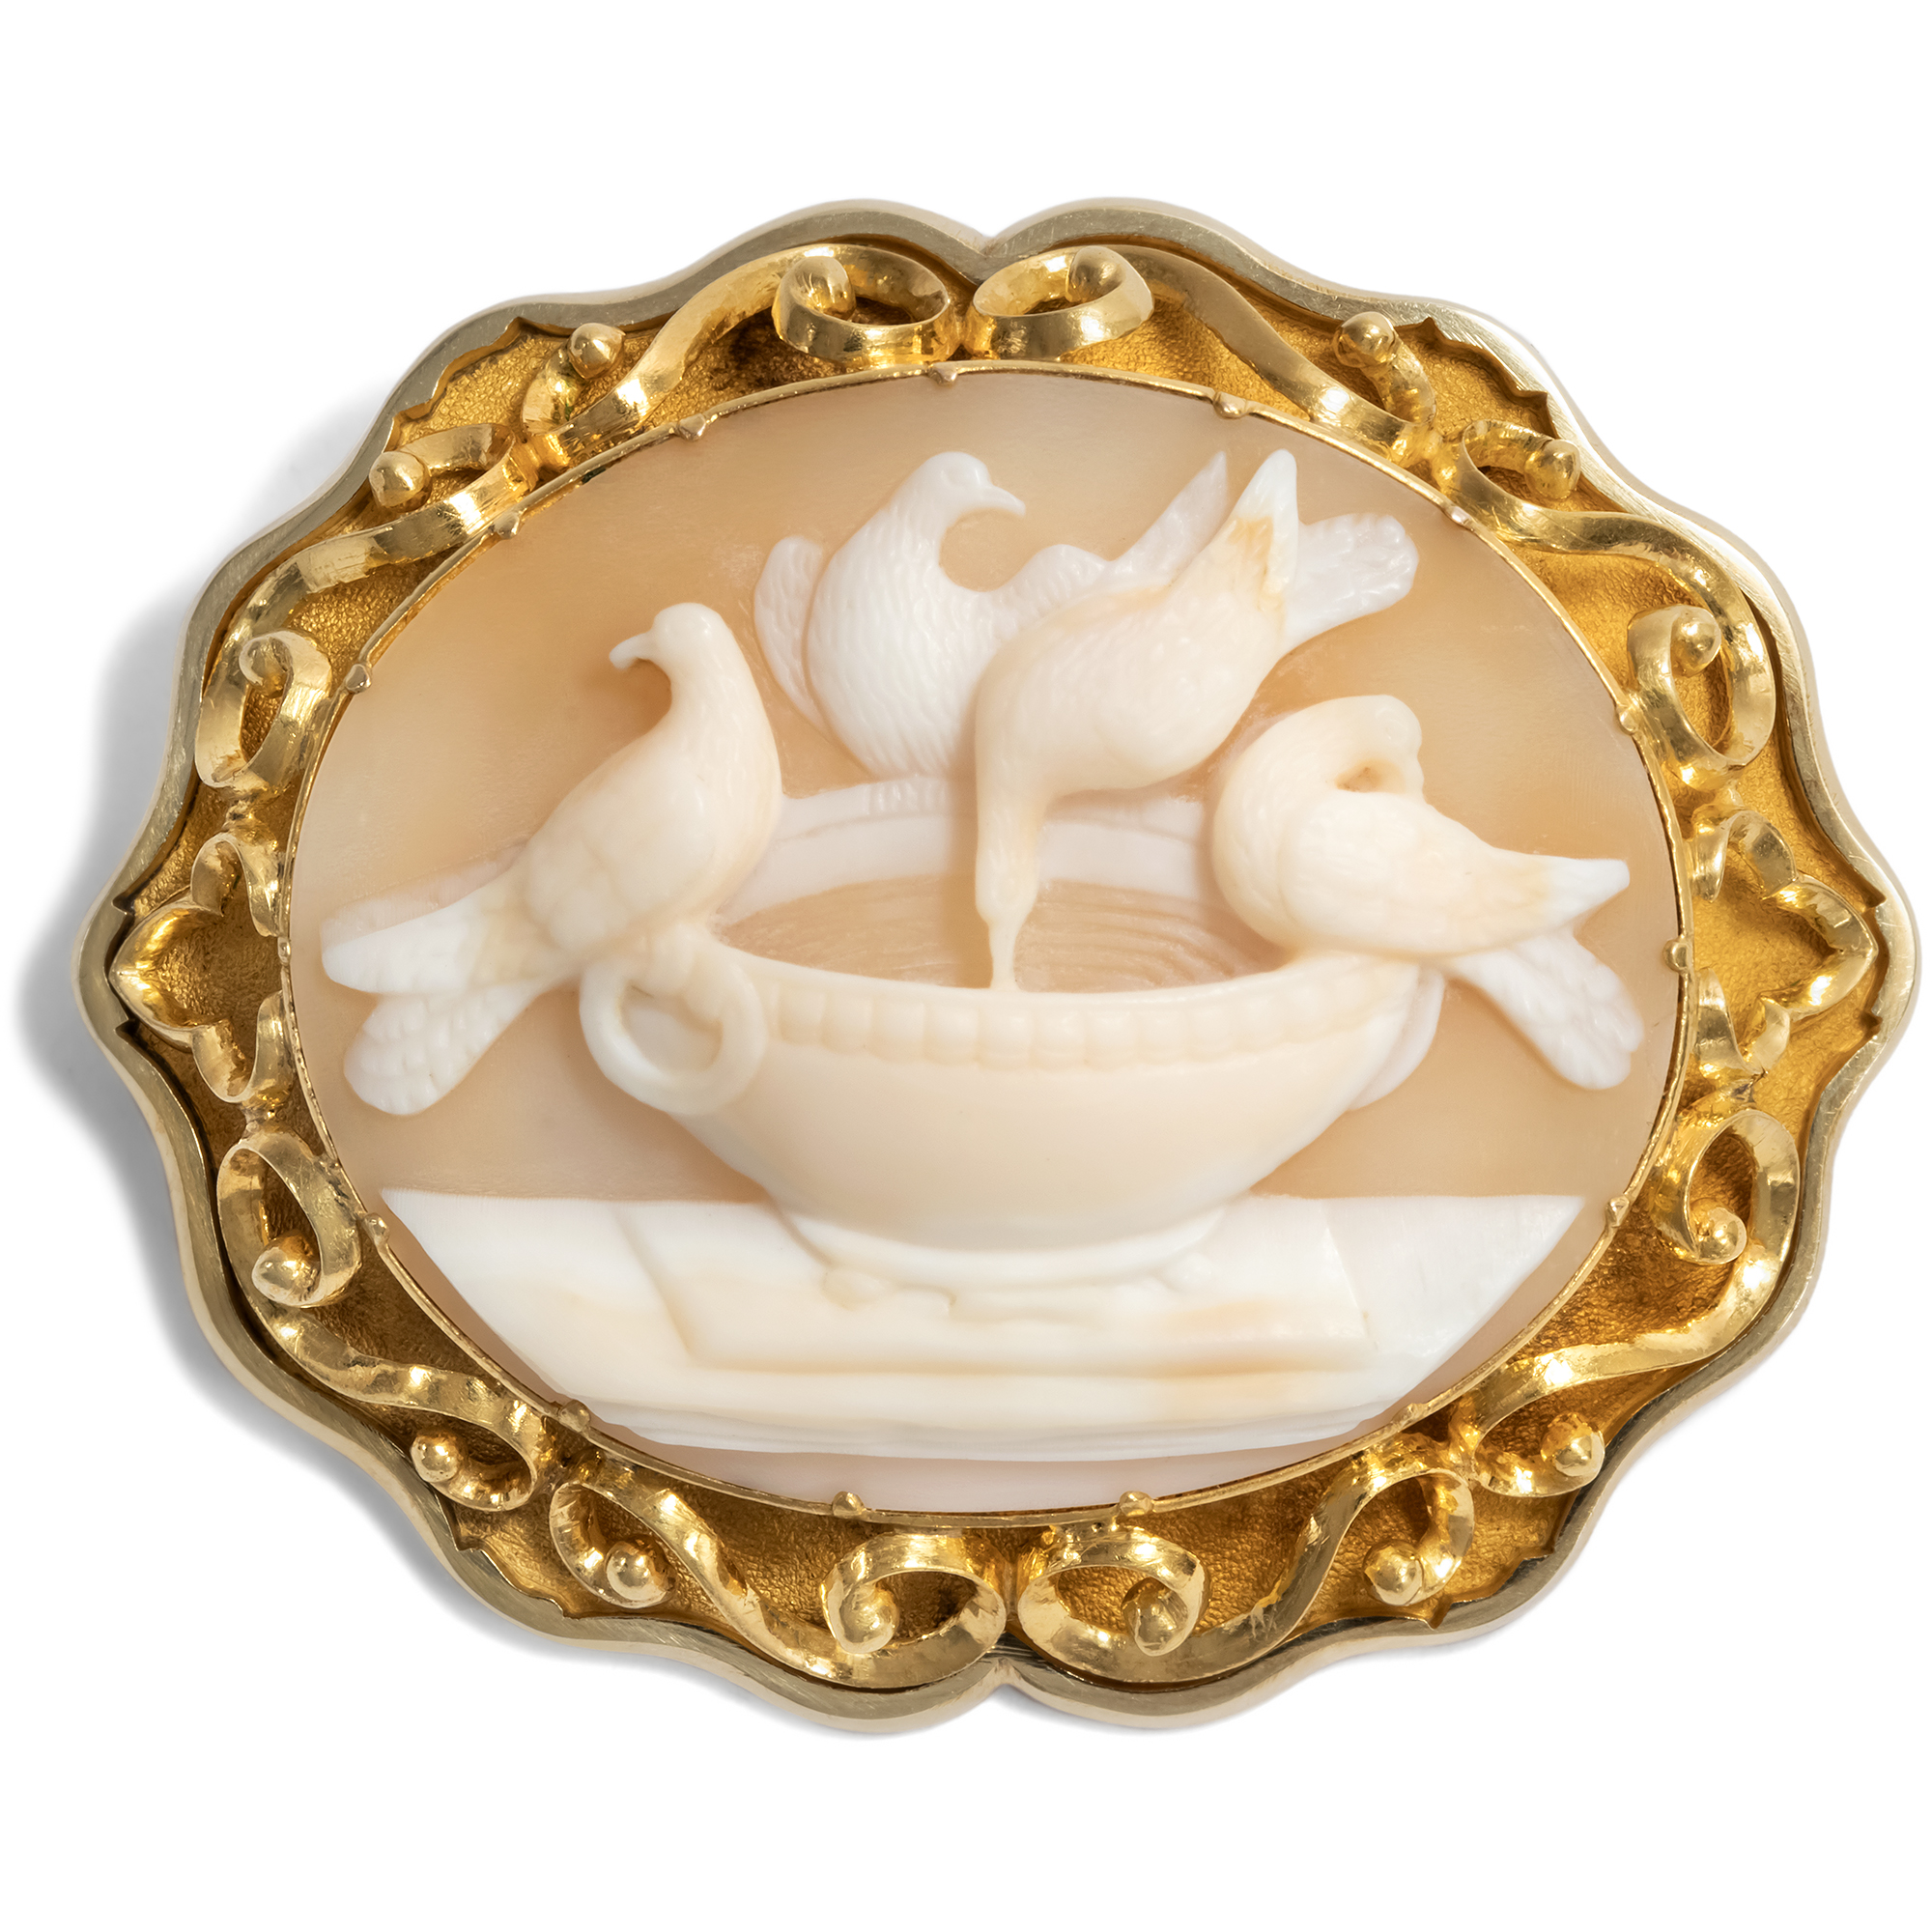 Antique Victorian Gold Brooch with Shell Cameo, c. 1860